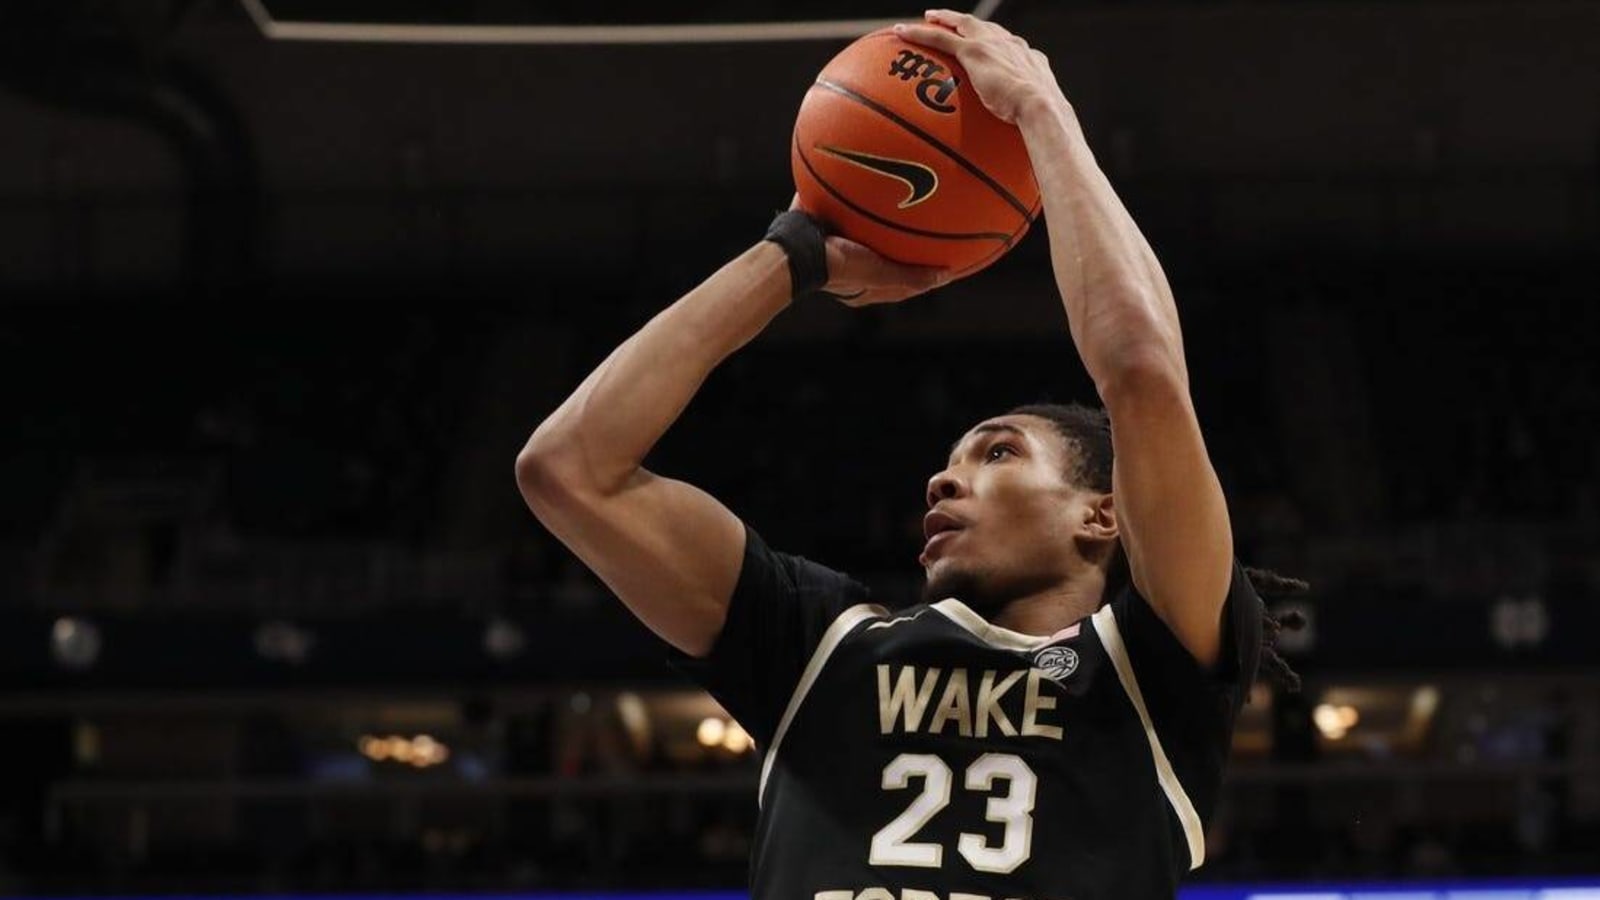 Lights-out shooting carries Wake Forest past Syracuse